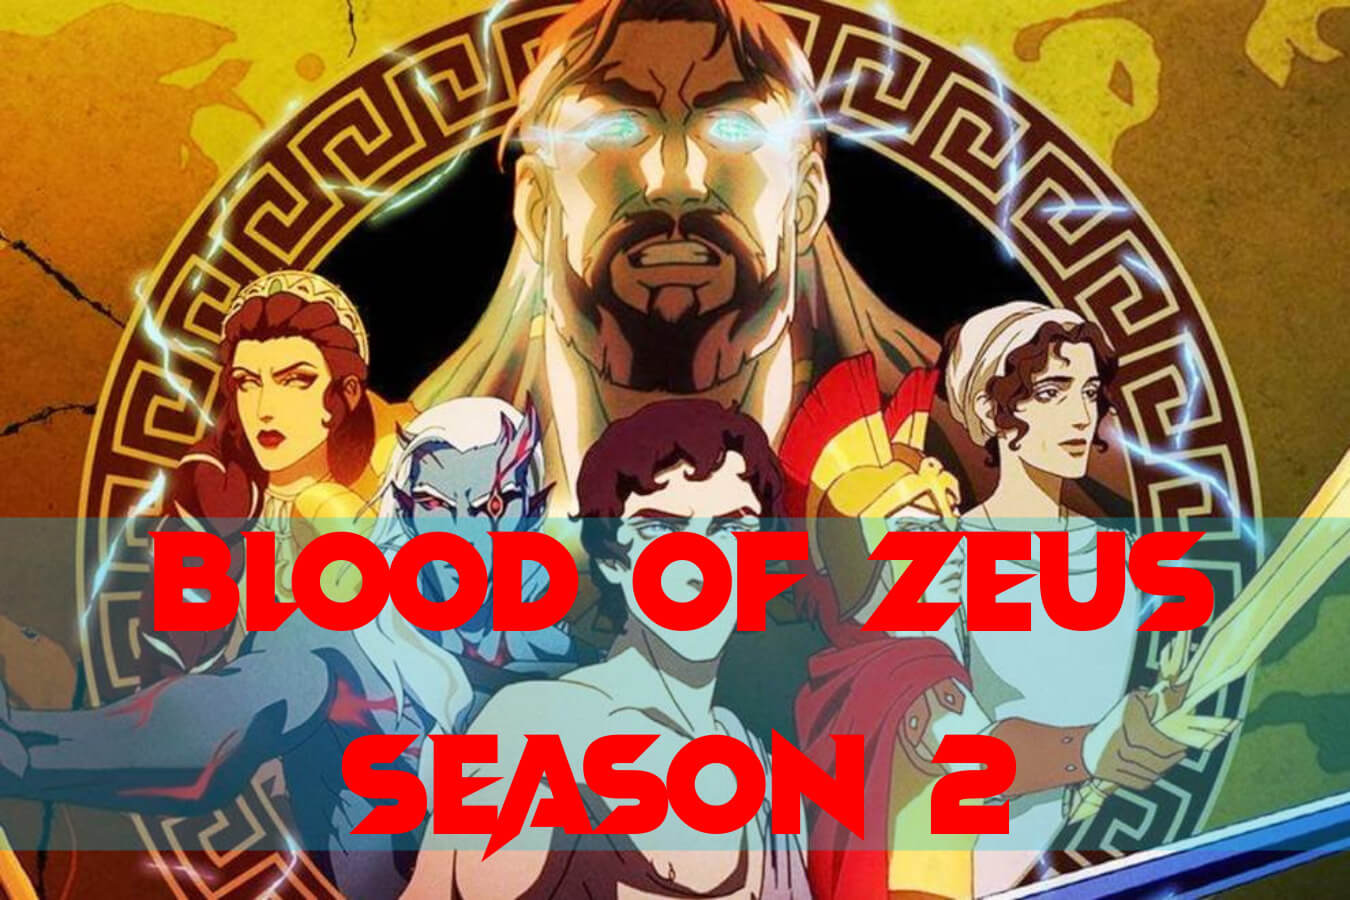 How many episodes will be included in the upcoming Season of Blood of Zeus.